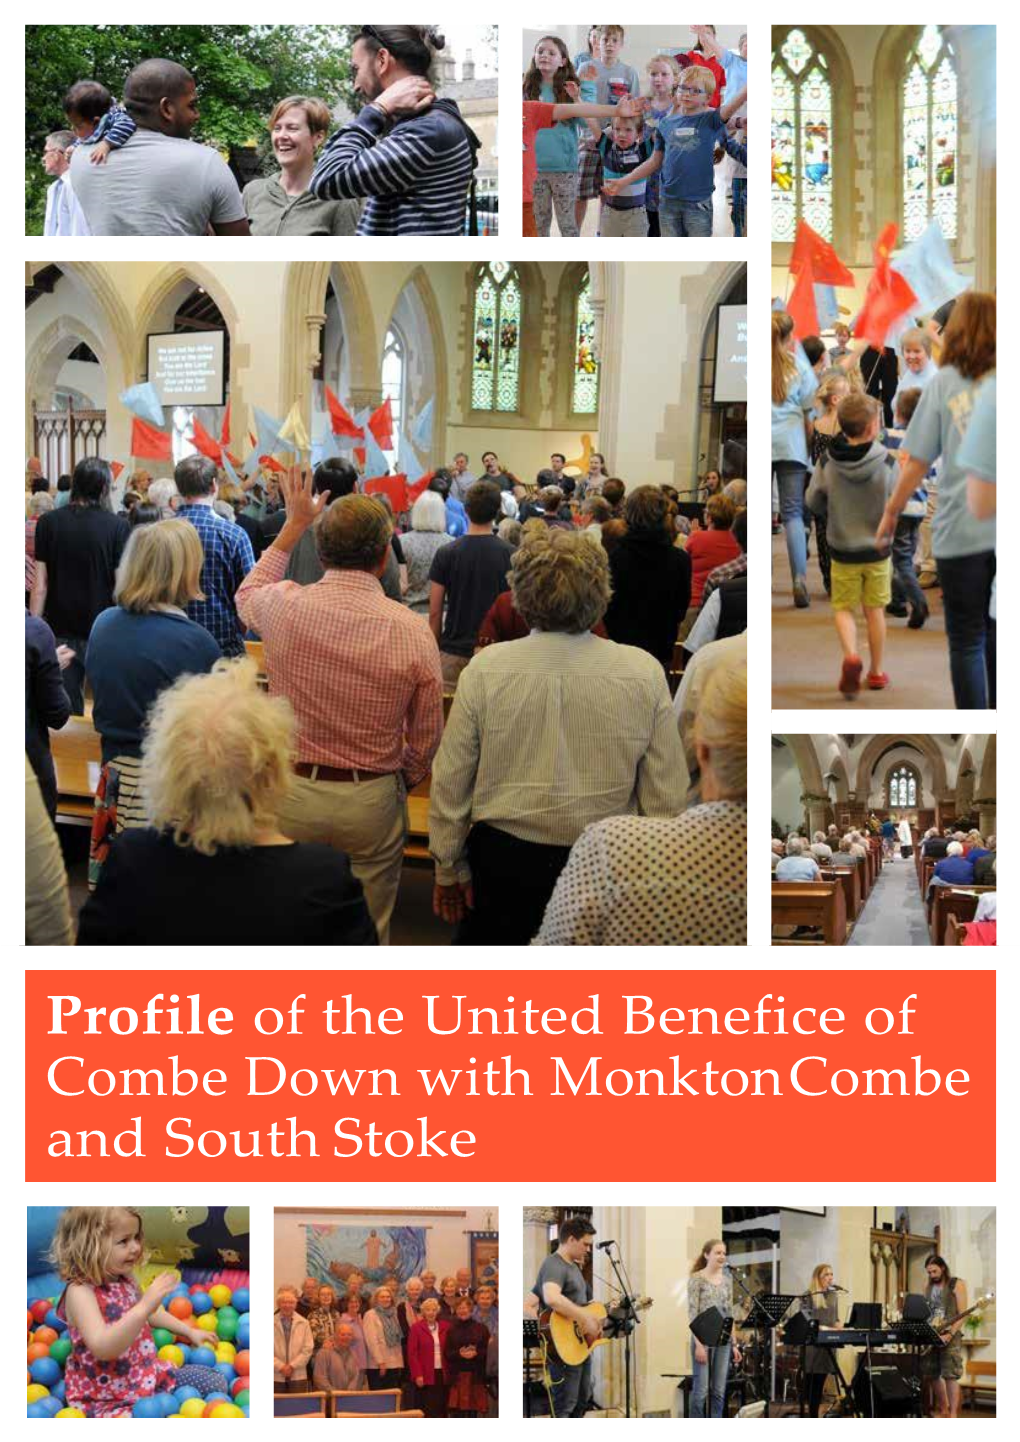 Profile of the United Benefice of Combe Down with Monkton Combe and South Stoke